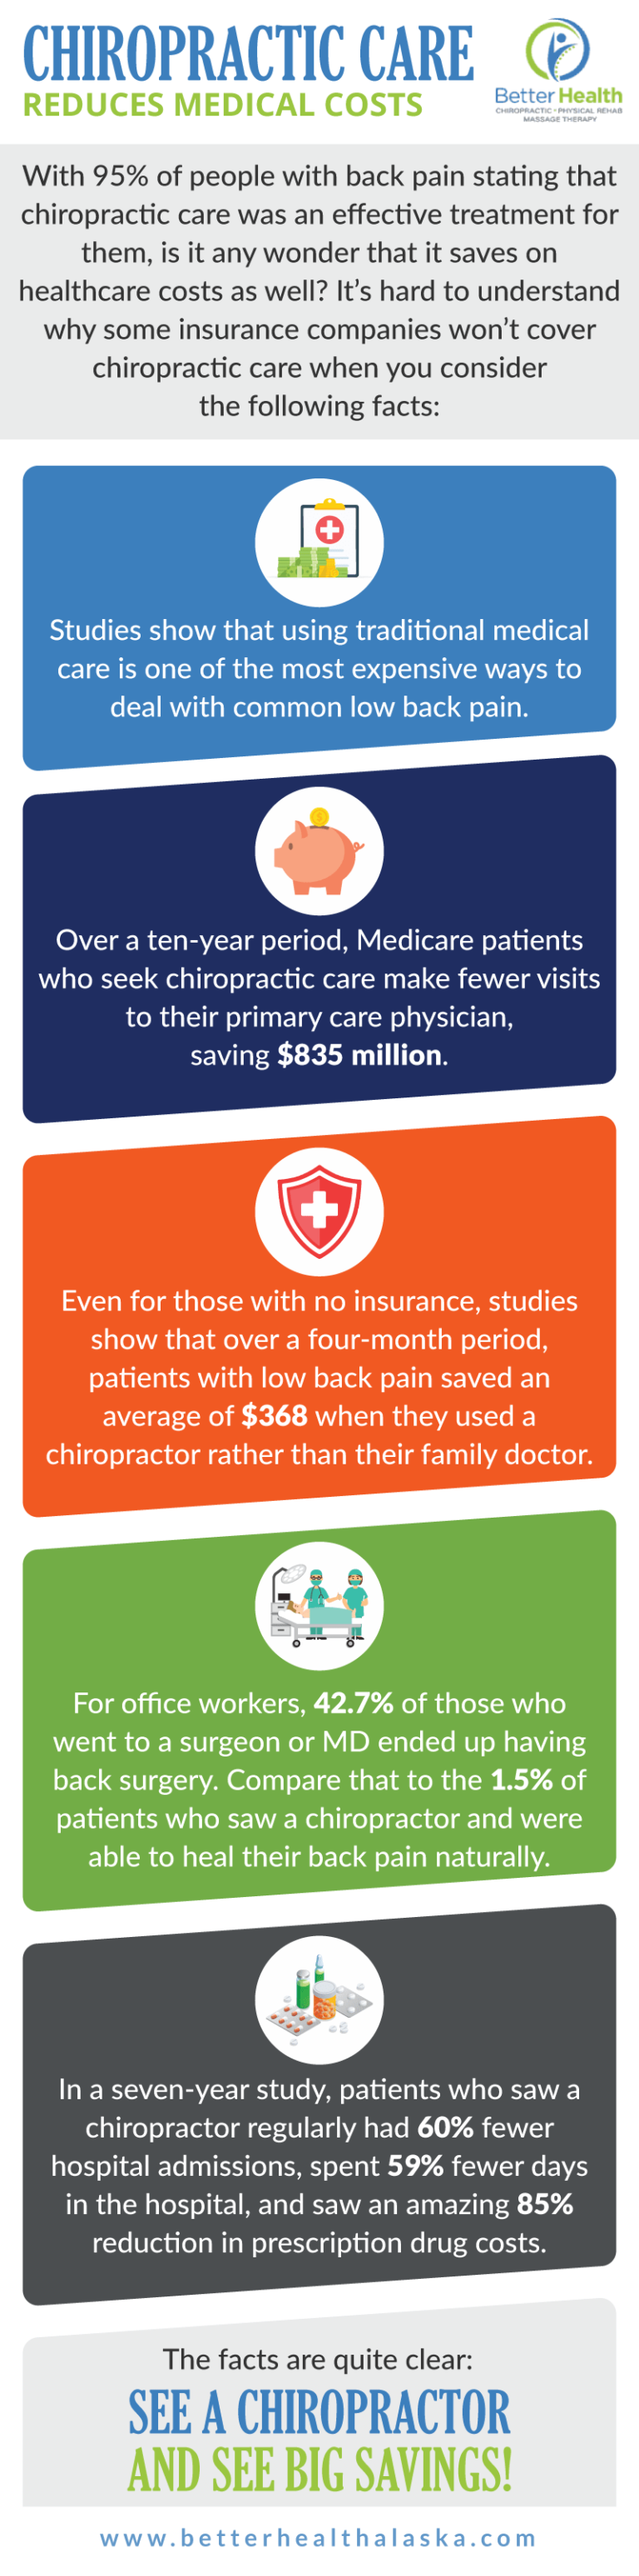 An infographic about cost reduction by chiropractic care.